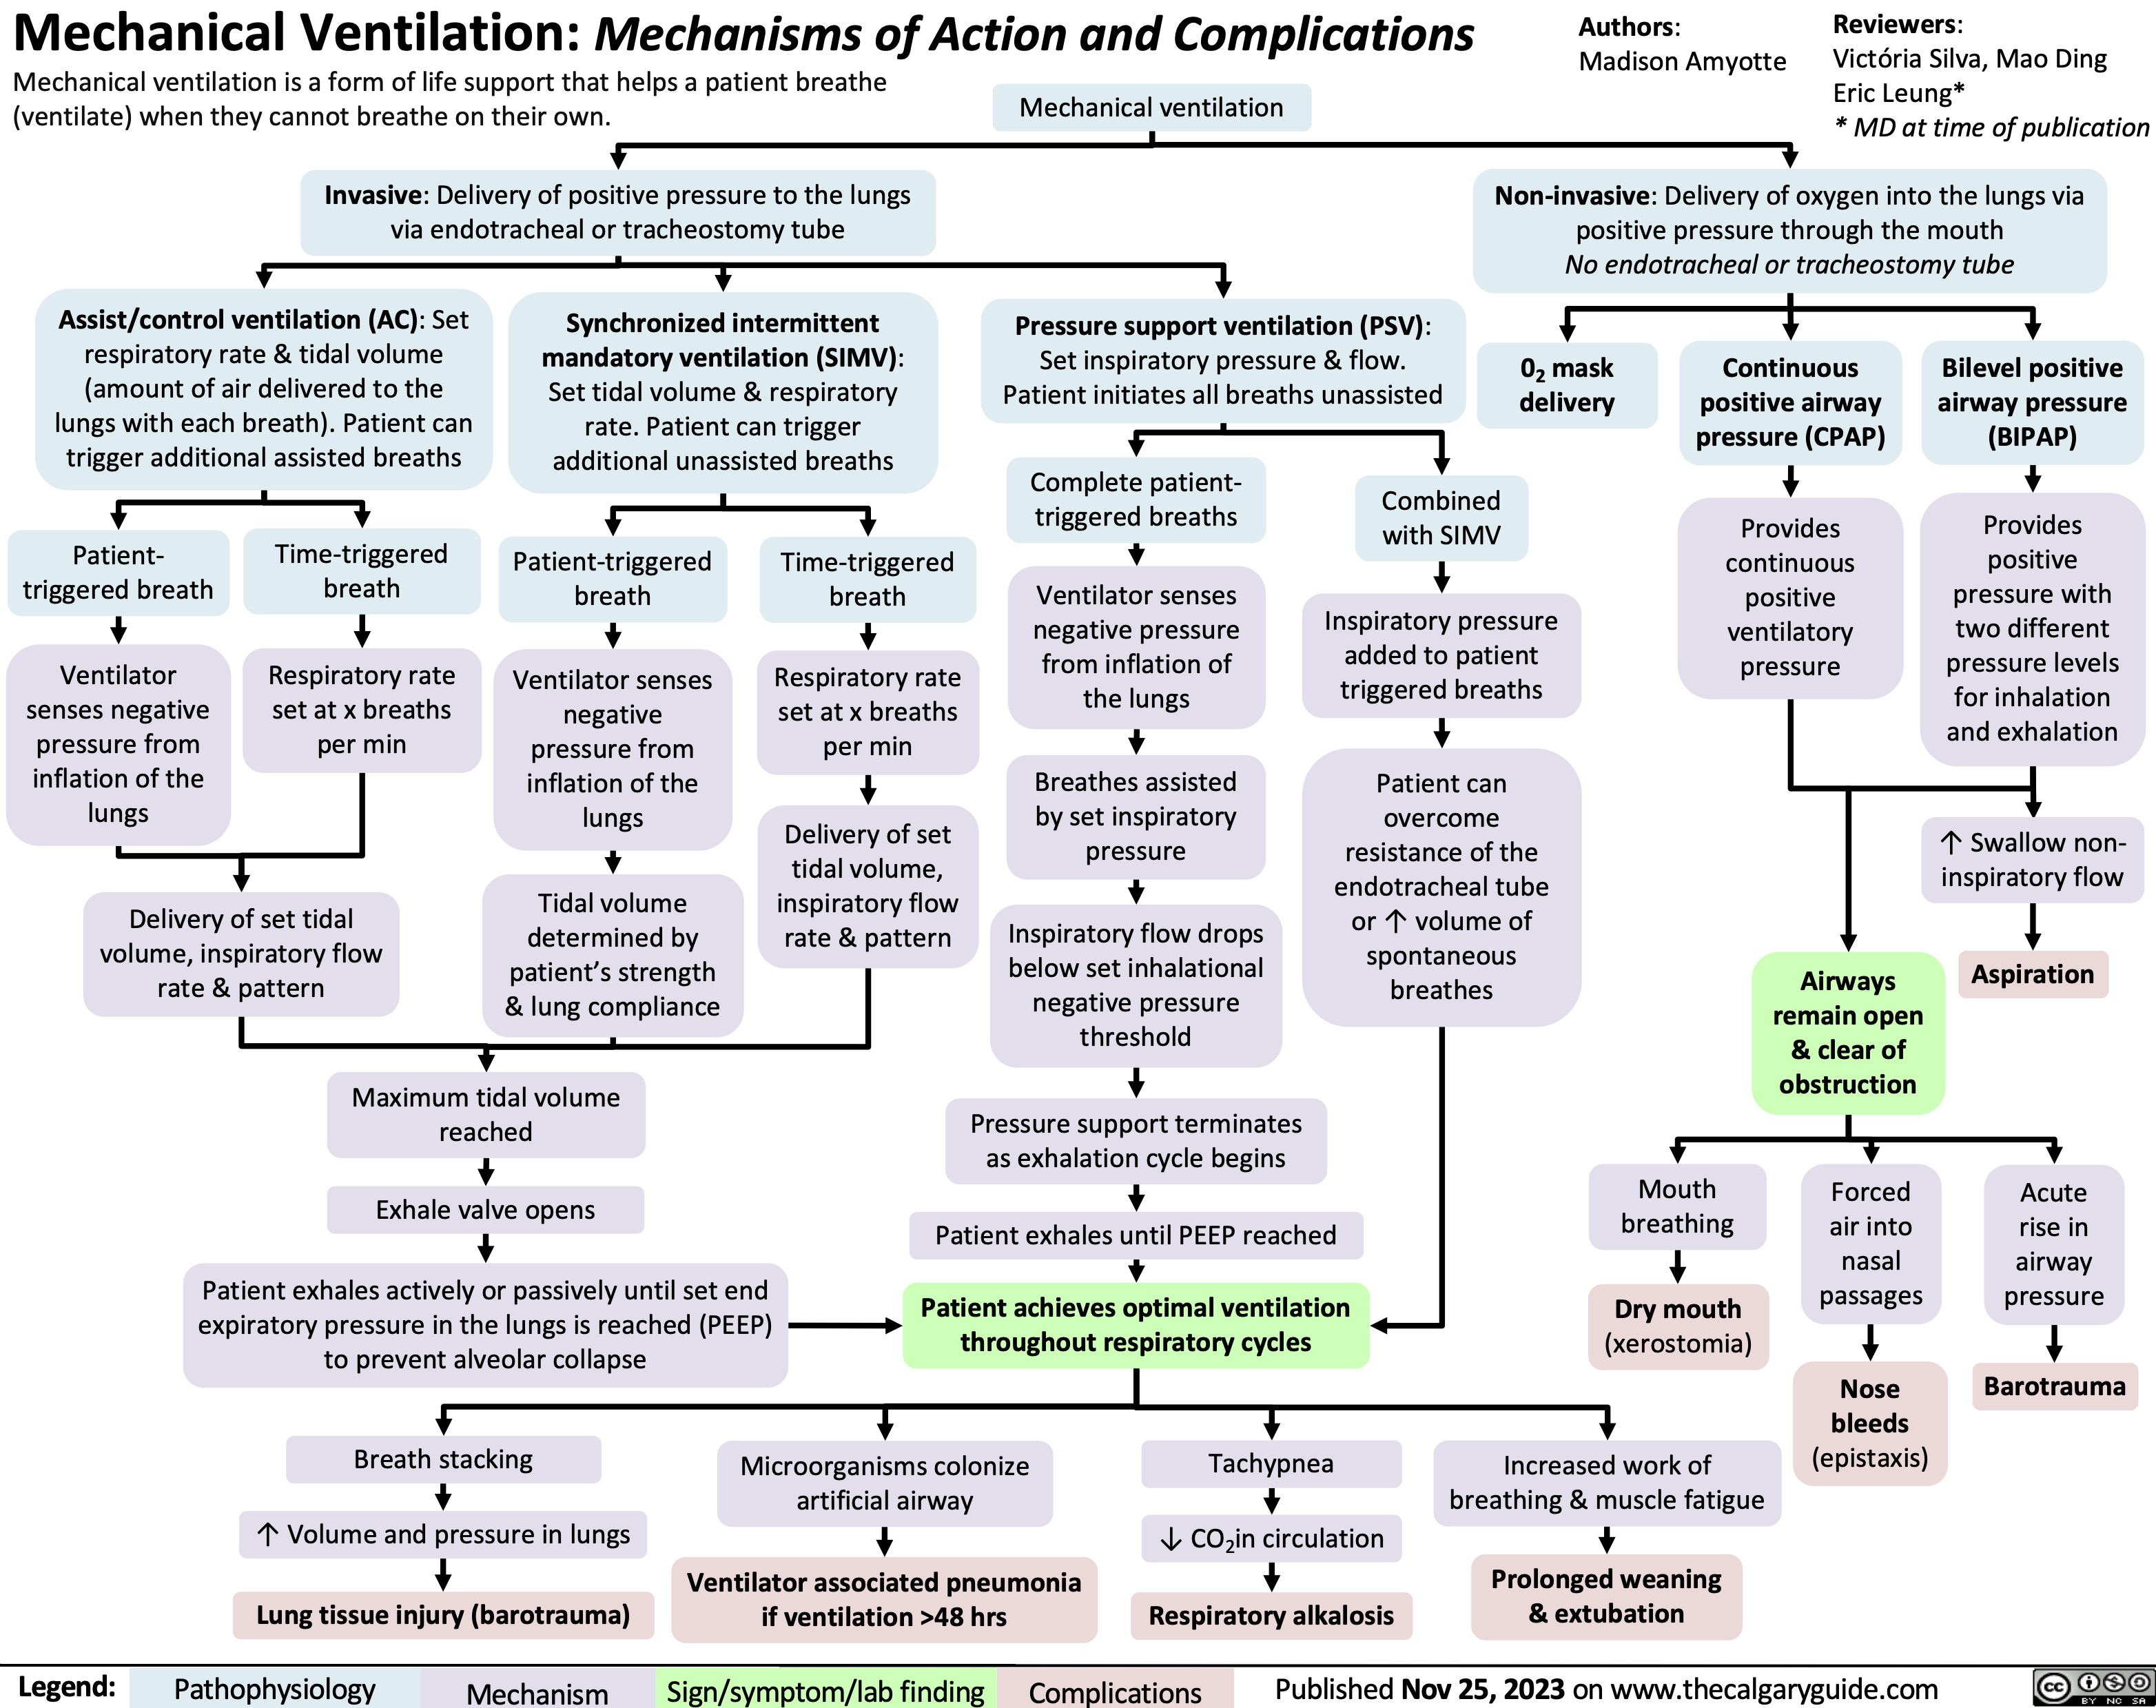 Mechanical Ventilation: Mechanisms of Action and Complications
Authors: Madison Amyotte
Reviewers:
Victória Silva, Mao Ding Eric Leung*
* MD at time of publication
Mechanical ventilation is a form of life support that helps a patient breathe (ventilate) when they cannot breathe on their own.
Invasive: Delivery of positive pressure to the lungs via endotracheal or tracheostomy tube
Mechanical ventilation
Pressure support ventilation (PSV): Set inspiratory pressure & flow. Patient initiates all breaths unassisted
Non-invasive: Delivery of oxygen into the lungs via positive pressure through the mouth
No endotracheal or tracheostomy tube
          Assist/control ventilation (AC): Set respiratory rate & tidal volume (amount of air delivered to the lungs with each breath). Patient can trigger additional assisted breaths
Synchronized intermittent mandatory ventilation (SIMV): Set tidal volume & respiratory rate. Patient can trigger additional unassisted breaths
02 mask delivery
Continuous positive airway pressure (CPAP)
Provides continuous positive ventilatory pressure
Bilevel positive airway pressure (BIPAP)
Provides positive pressure with two different pressure levels for inhalation and exhalation
↑ Swallow non- inspiratory flow
Aspiration
Acute rise in airway pressure
Barotrauma
              Patient- triggered breath
Ventilator senses negative pressure from inflation of the lungs
Time-triggered breath
Respiratory rate set at x breaths per min
Patient-triggered breath
Ventilator senses negative pressure from inflation of the lungs
Tidal volume determined by patient’s strength & lung compliance
Time-triggered breath
Respiratory rate set at x breaths per min
Delivery of set tidal volume, inspiratory flow rate & pattern
Complete patient- triggered breaths
Ventilator senses negative pressure from inflation of the lungs
Breathes assisted by set inspiratory pressure
Inspiratory flow drops below set inhalational negative pressure threshold
Pressure support terminates as exhalation cycle begins
Combined with SIMV
Inspiratory pressure added to patient triggered breaths
Patient can overcome resistance of the endotracheal tube or ↑ volume of spontaneous breathes
              Delivery of set tidal volume, inspiratory flow rate & pattern
Airways remain open & clear of obstruction
Forced air into nasal passages
Nose bleeds (epistaxis)
       Maximum tidal volume reached
Exhale valve opens
Patient exhales actively or passively until set end expiratory pressure in the lungs is reached (PEEP) to prevent alveolar collapse
Patient exhales until PEEP reached
Patient achieves optimal ventilation throughout respiratory cycles
Mouth breathing
Dry mouth
(xerostomia)
Increased work of breathing & muscle fatigue
Prolonged weaning & extubation
                 Breath stacking
↑ Volume and pressure in lungs Lung tissue injury (barotrauma)
Microorganisms colonize artificial airway
Ventilator associated pneumonia if ventilation >48 hrs
Tachypnea
↓ CO2in circulation Respiratory alkalosis
        Legend:
 Pathophysiology
 Mechanism
 Sign/symptom/lab finding
 Complications
 Published Nov 25, 2023 on www.thecalgaryguide.com
 